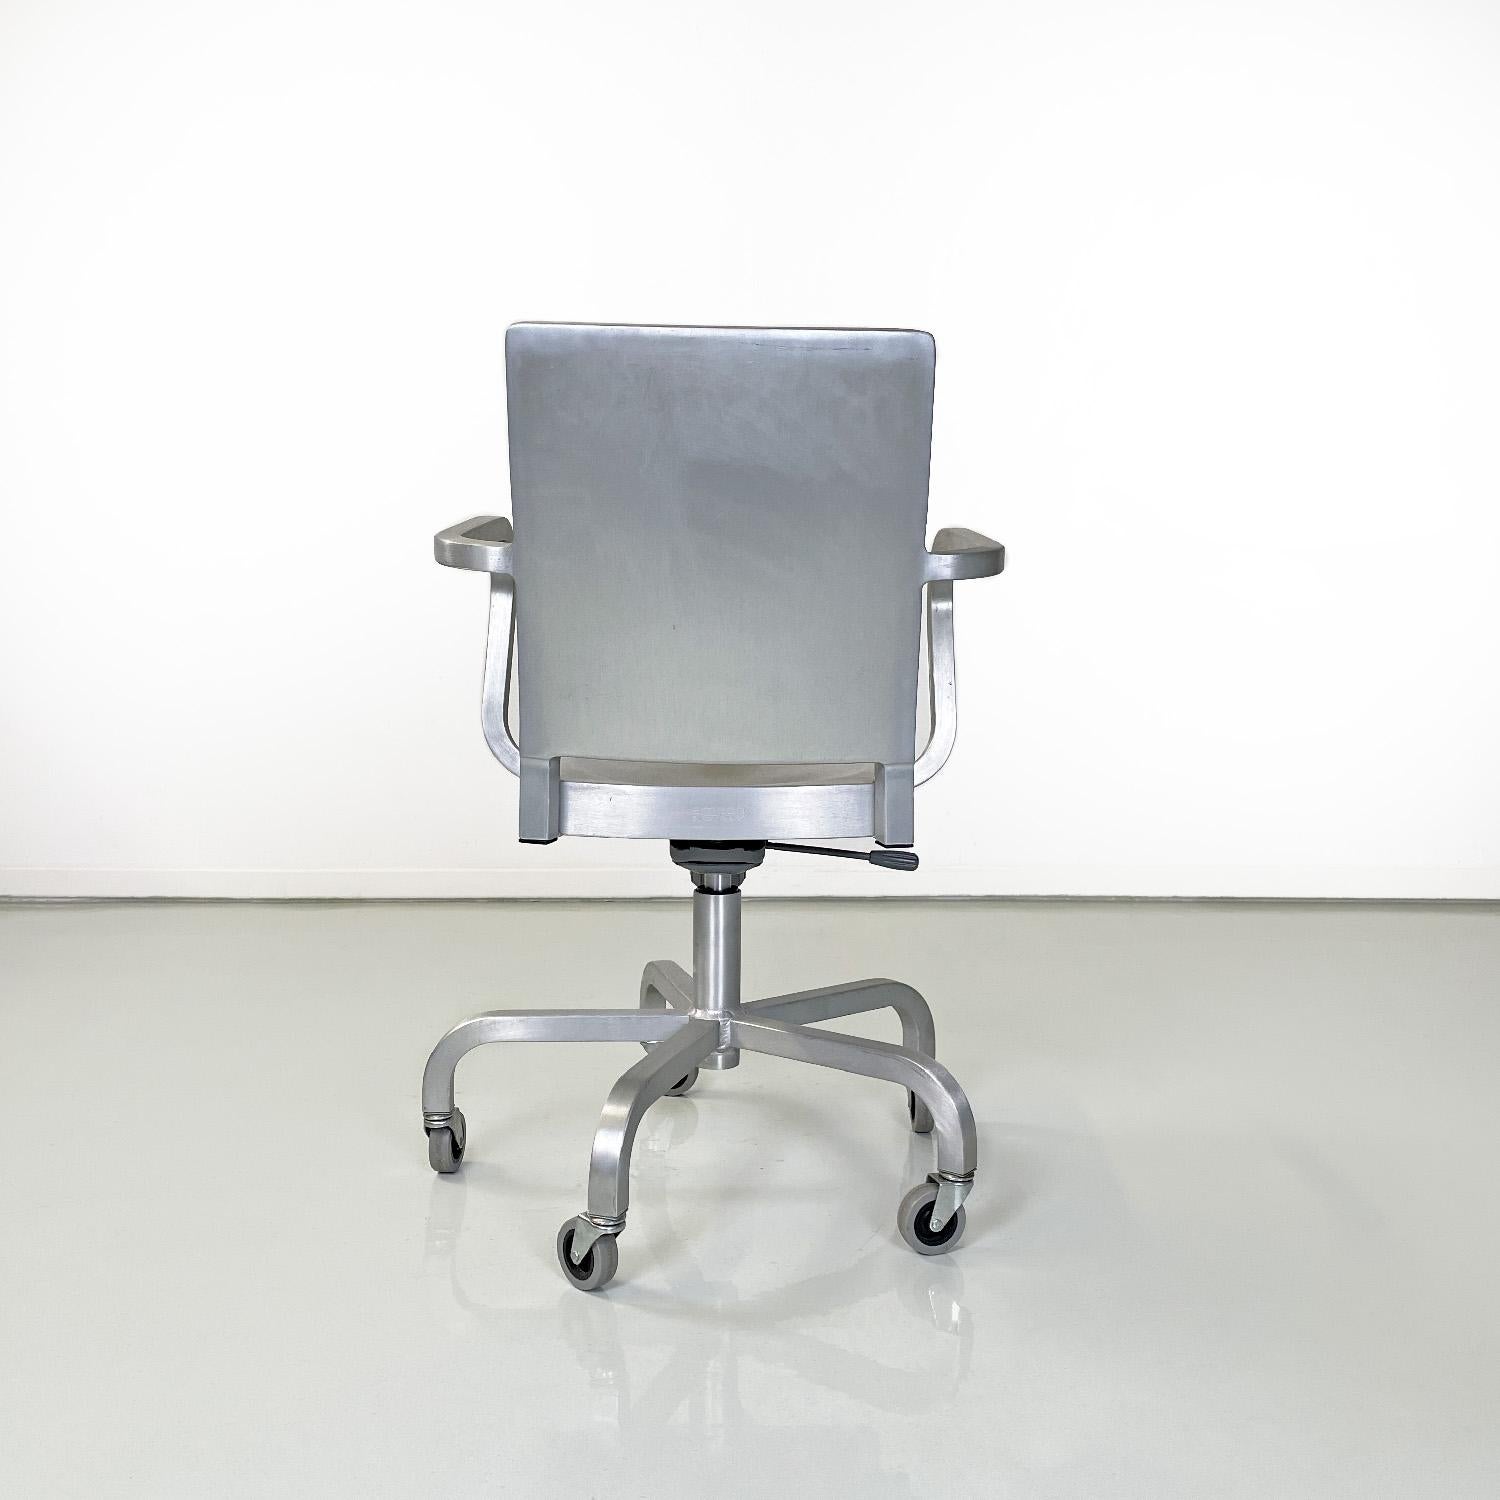 American modern swivel chairs Hudson brushed aluminum by Starck for Emeco, 2000 For Sale 1